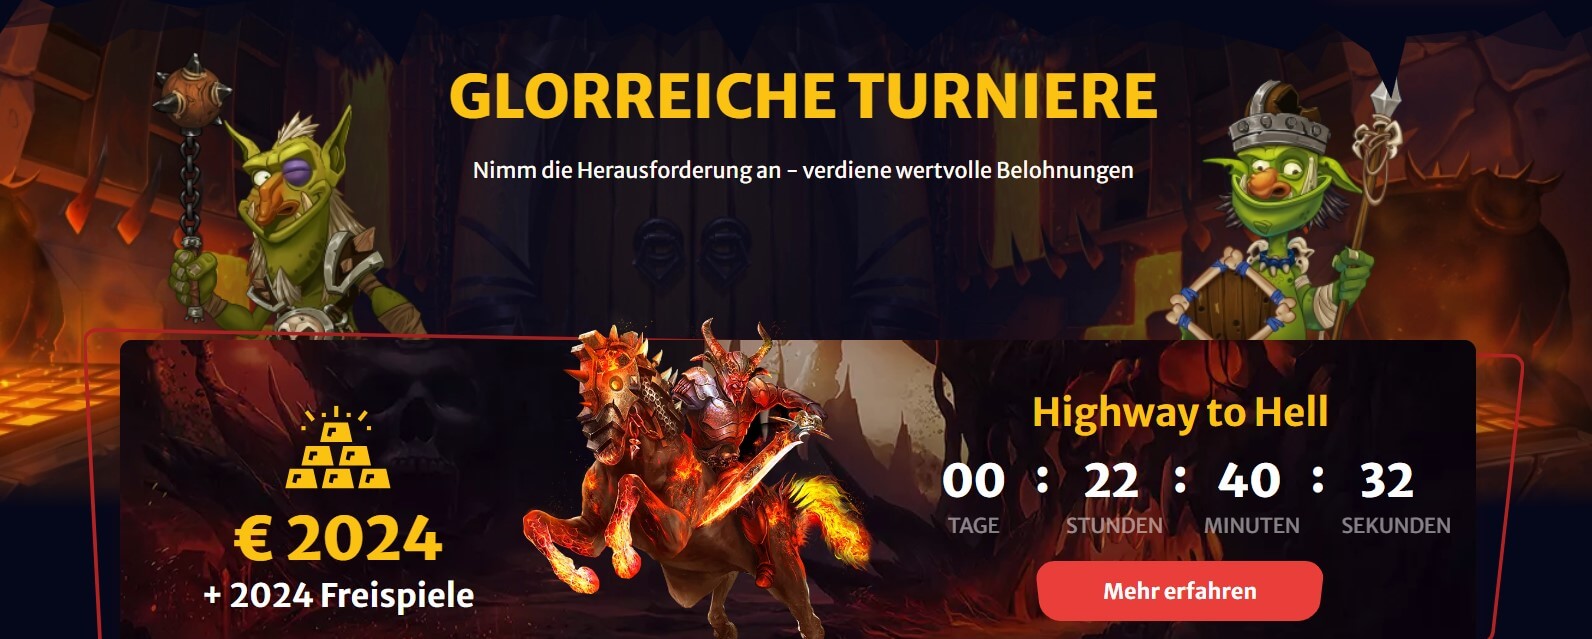 hell spin turniere